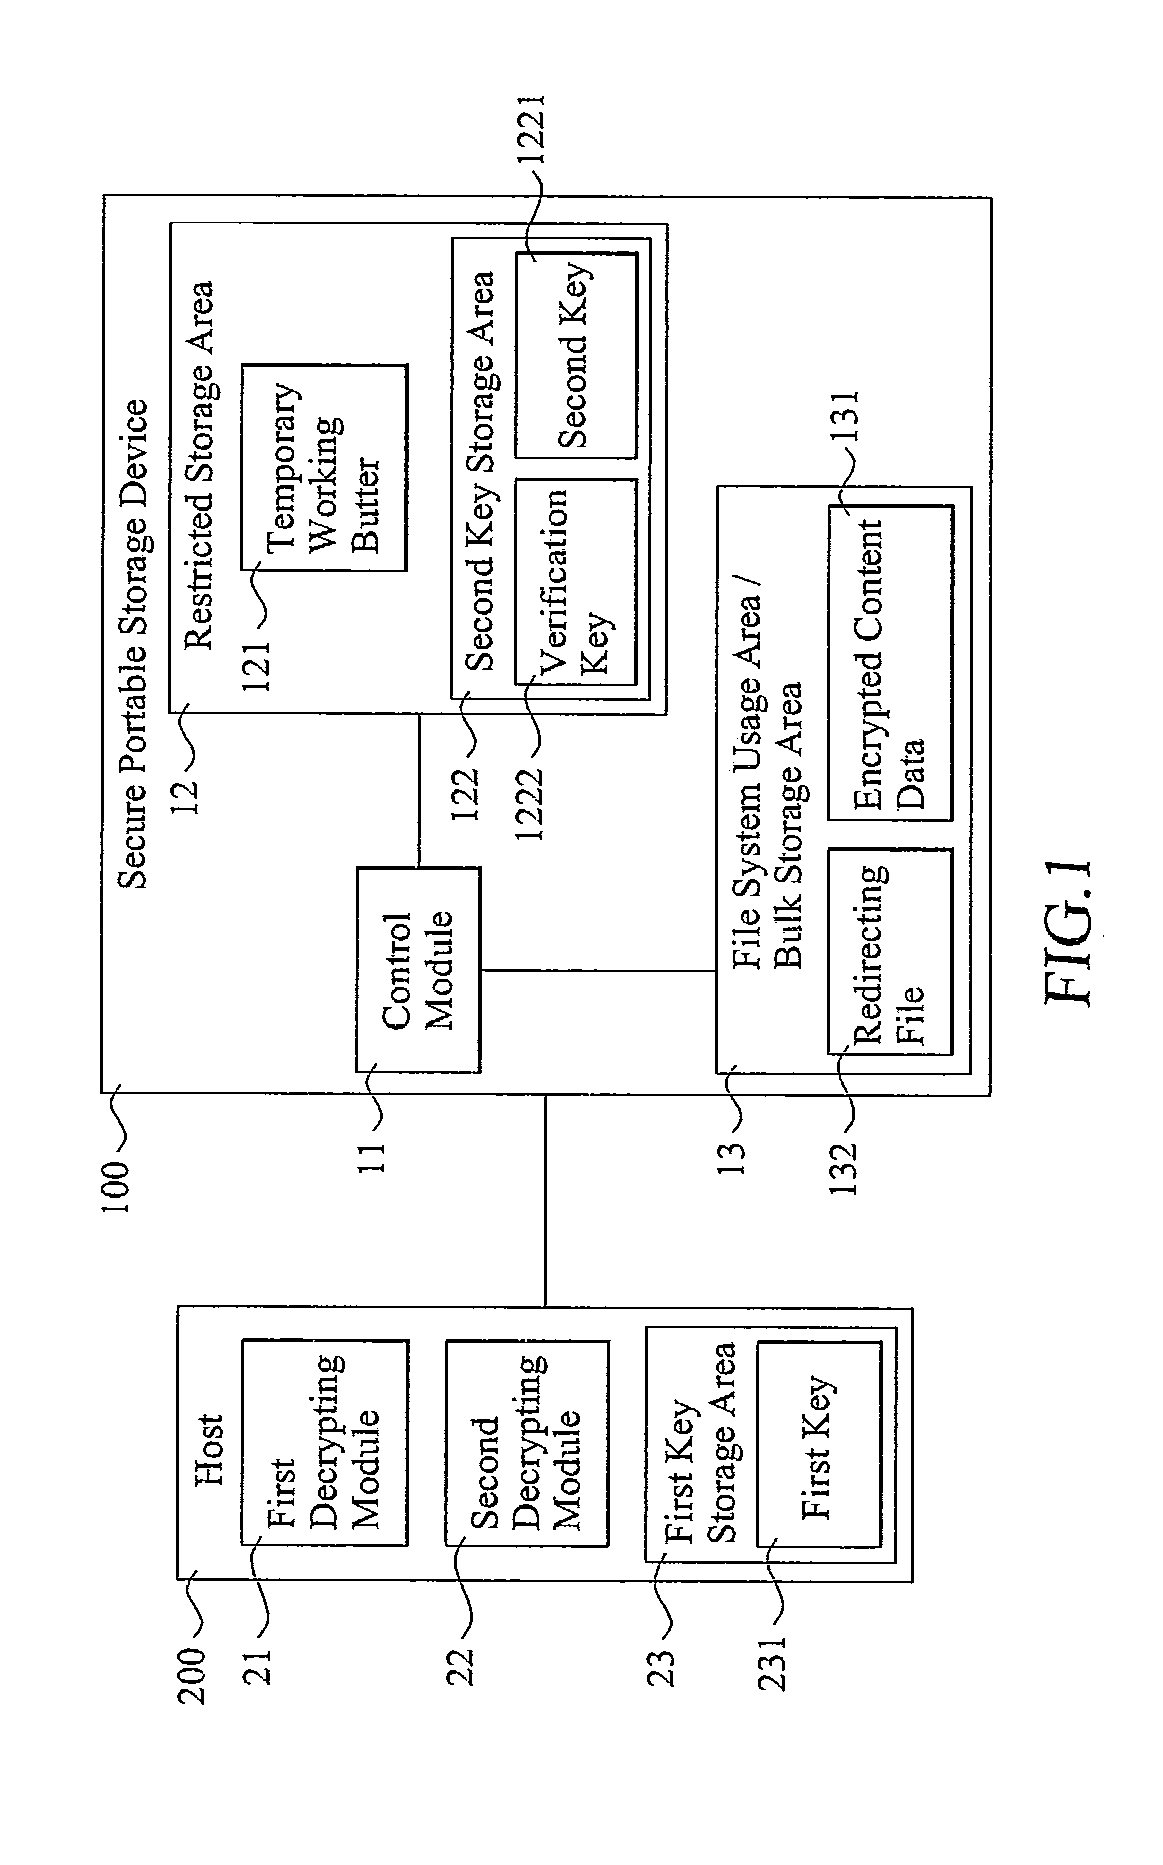 Access control for secure portable storage device